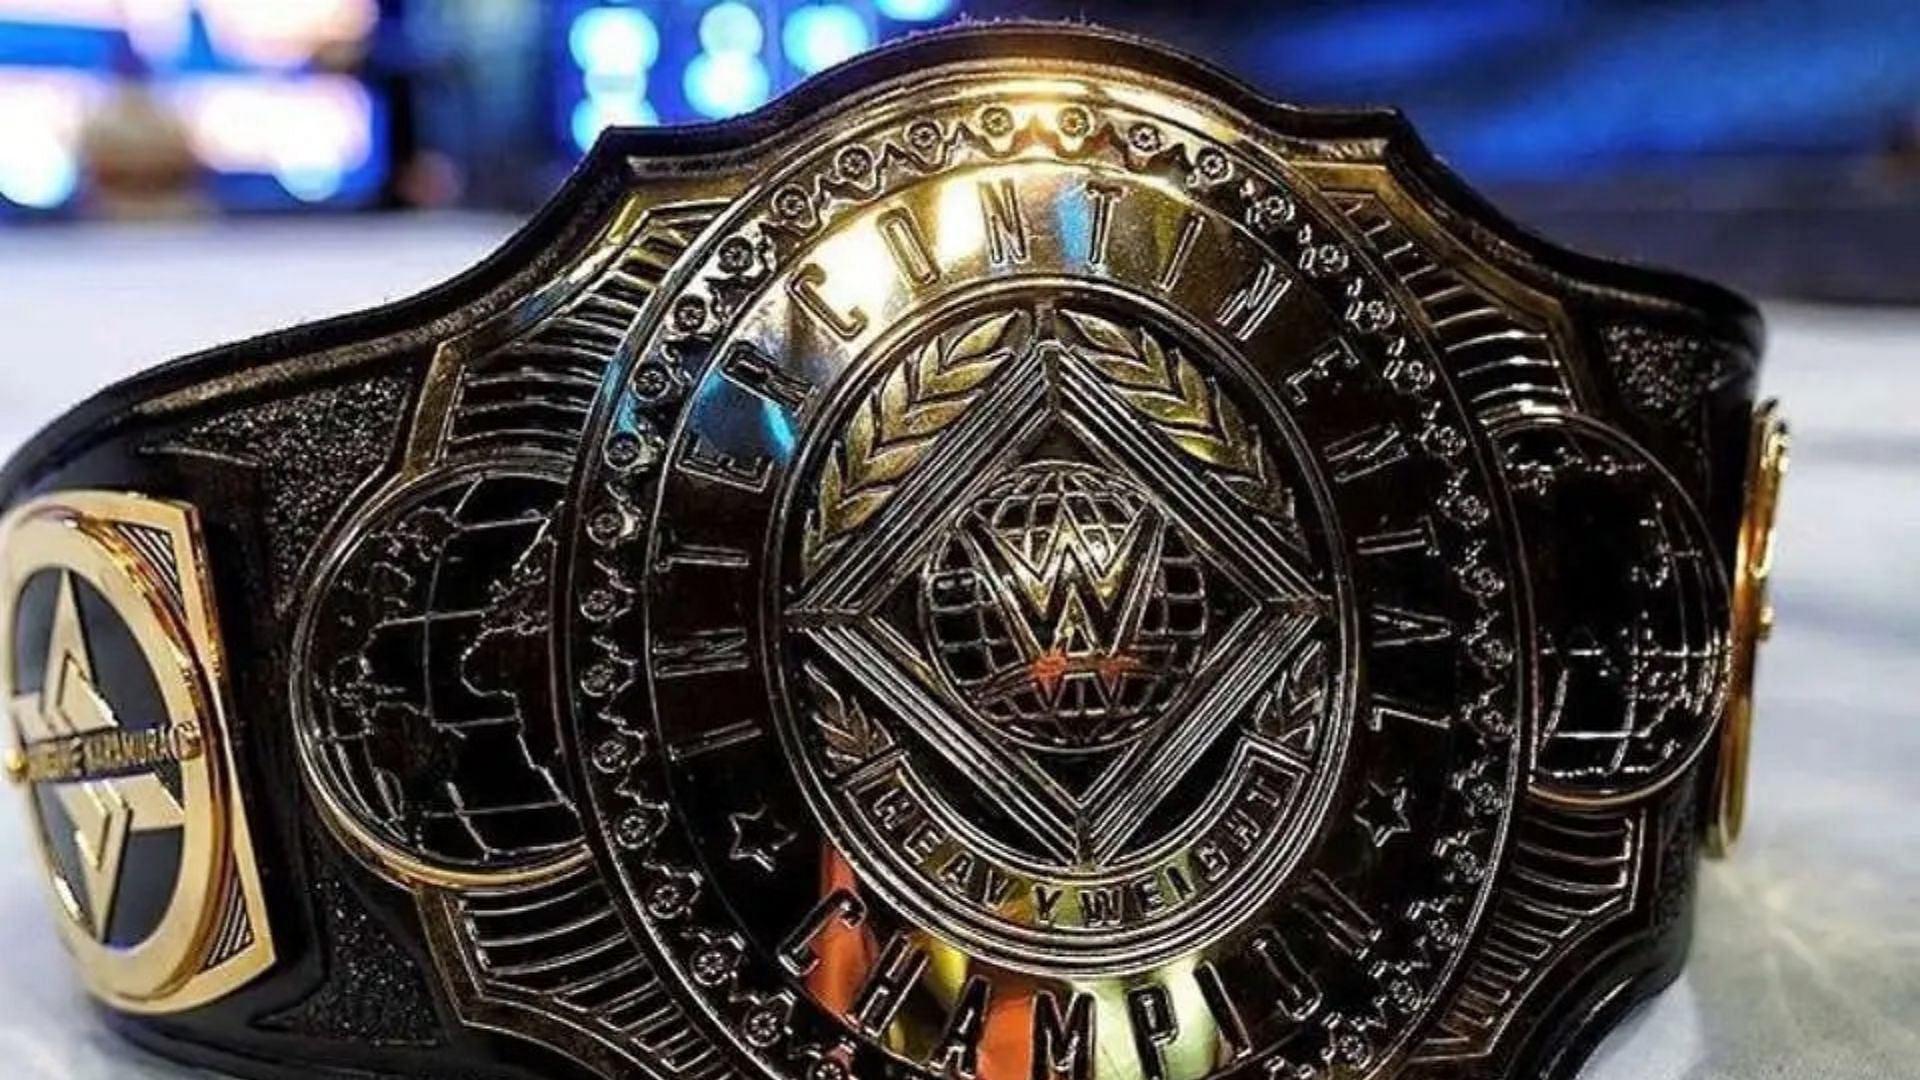 The WWE Intercontinental Championship has been won by several iconic superstars